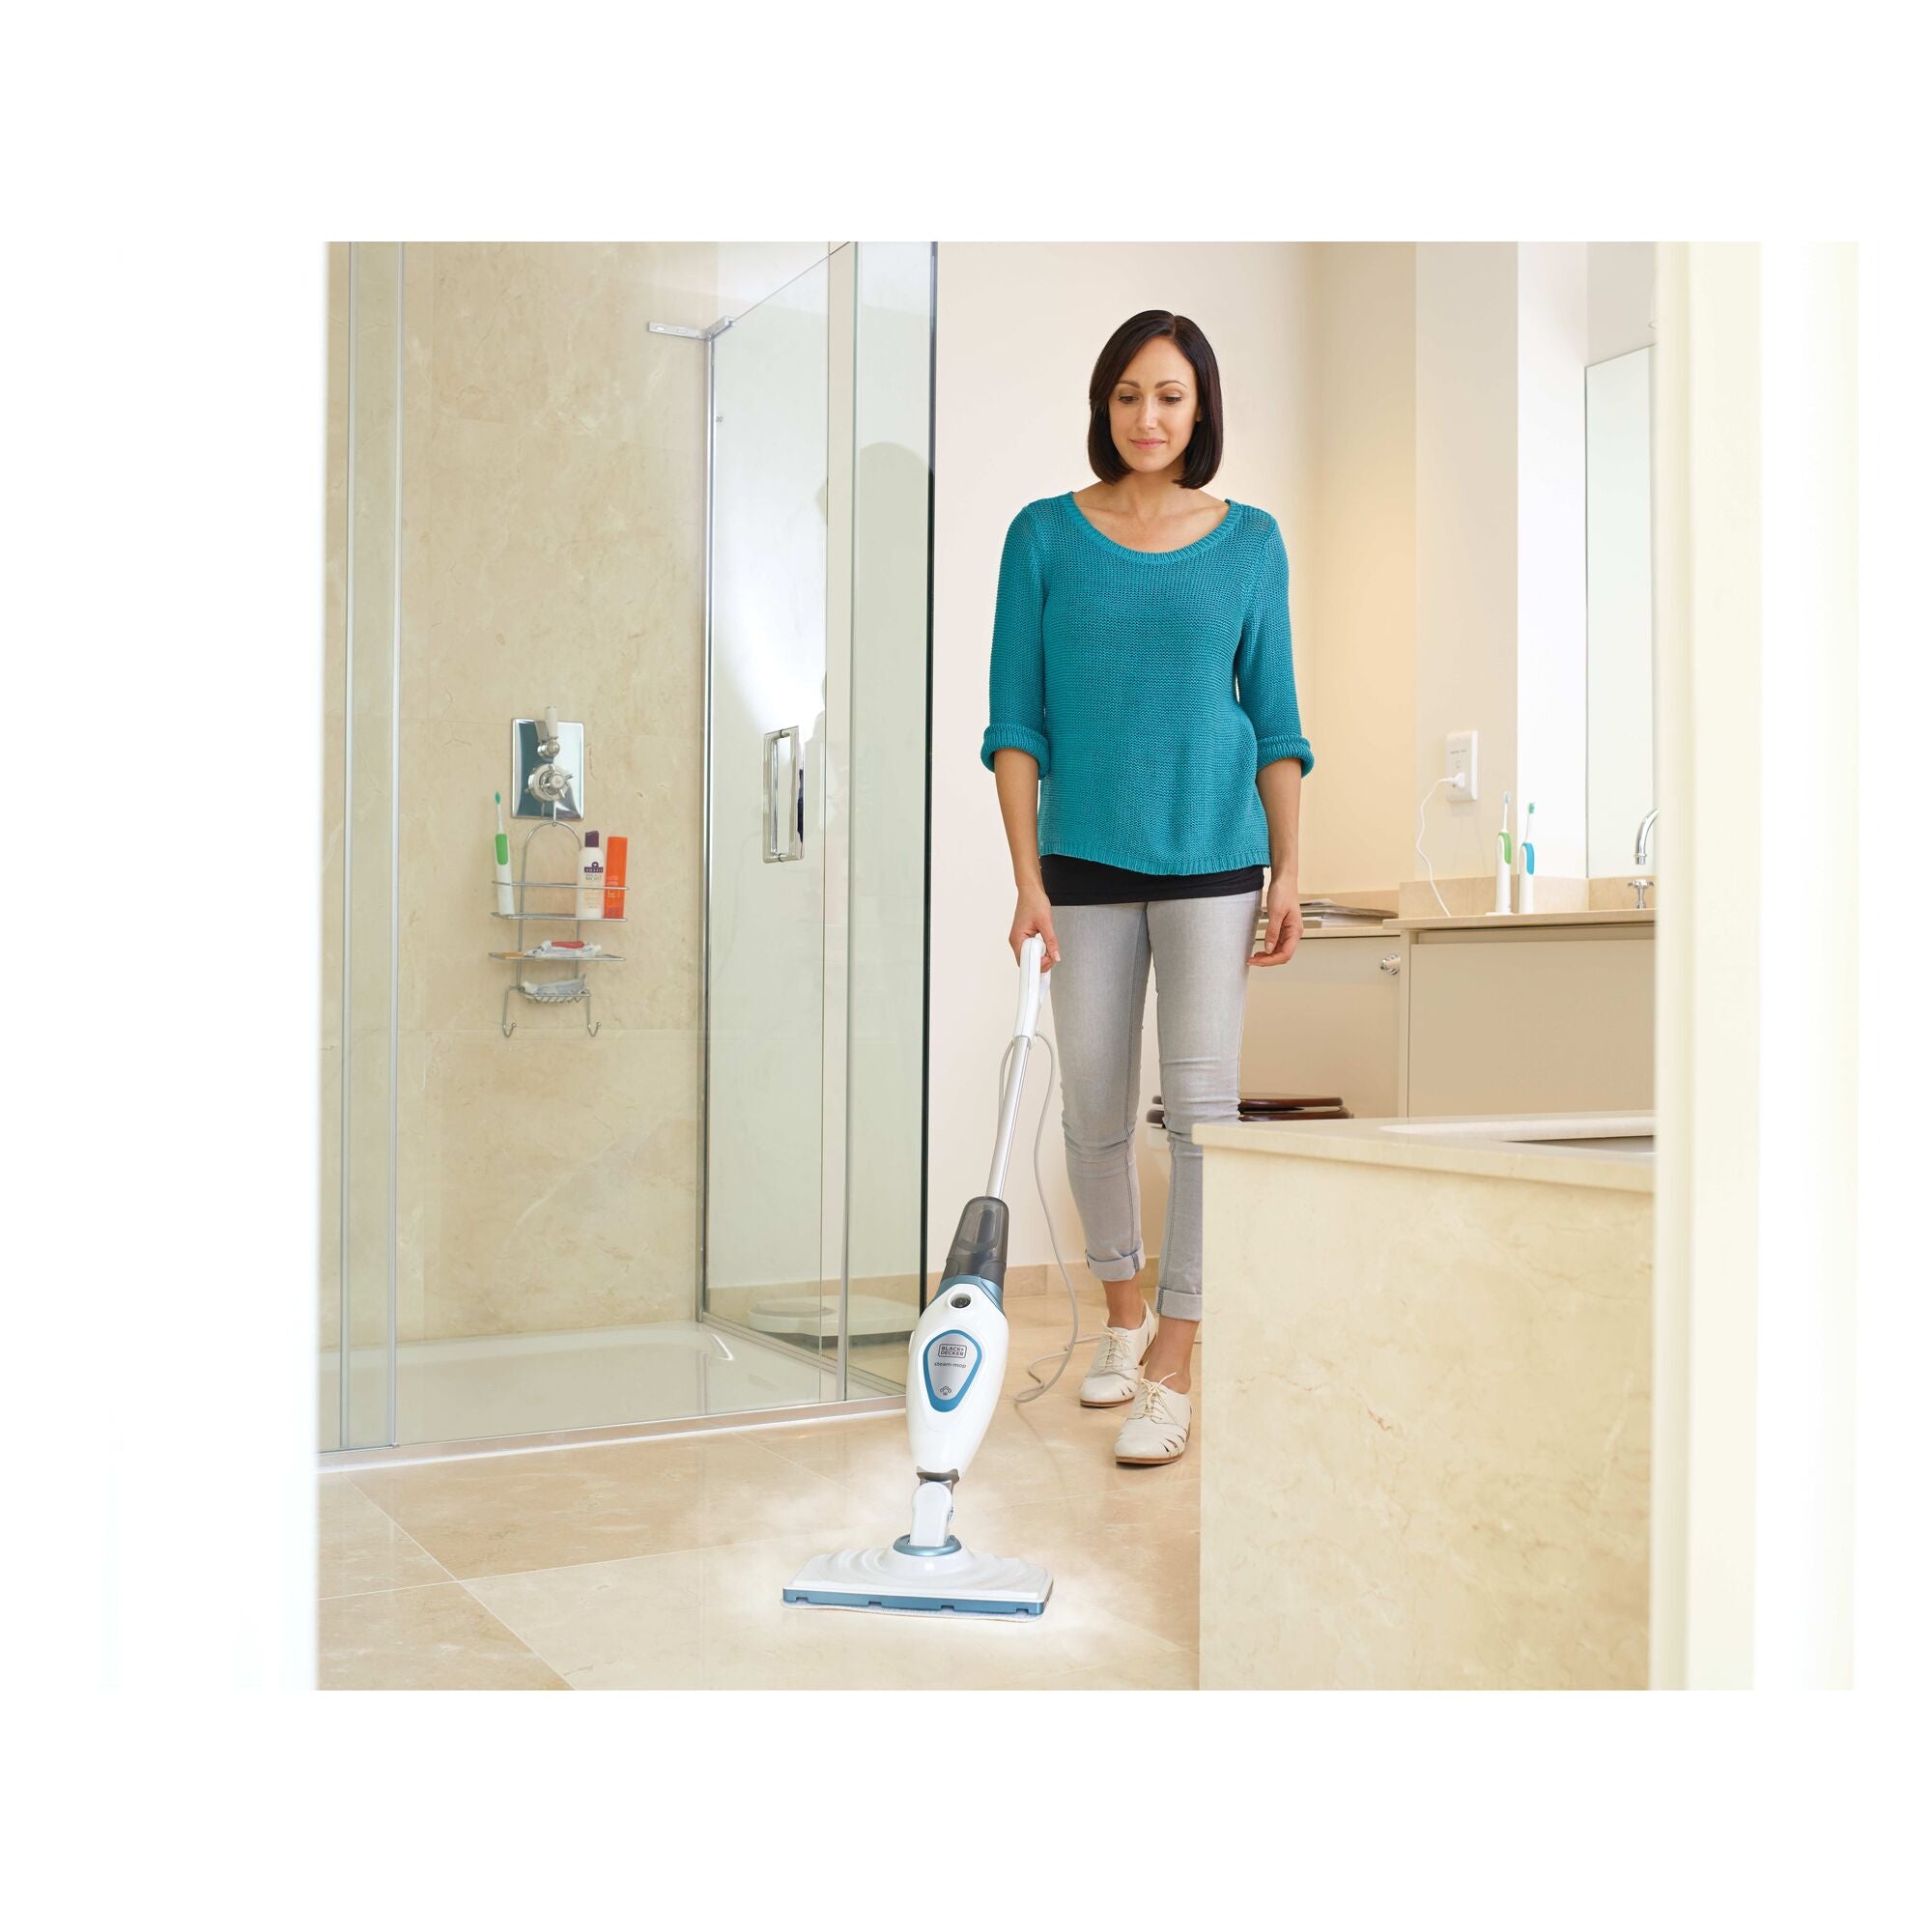 Steam mop with lift plus reach head being used to mop the bathroom floor by a person.